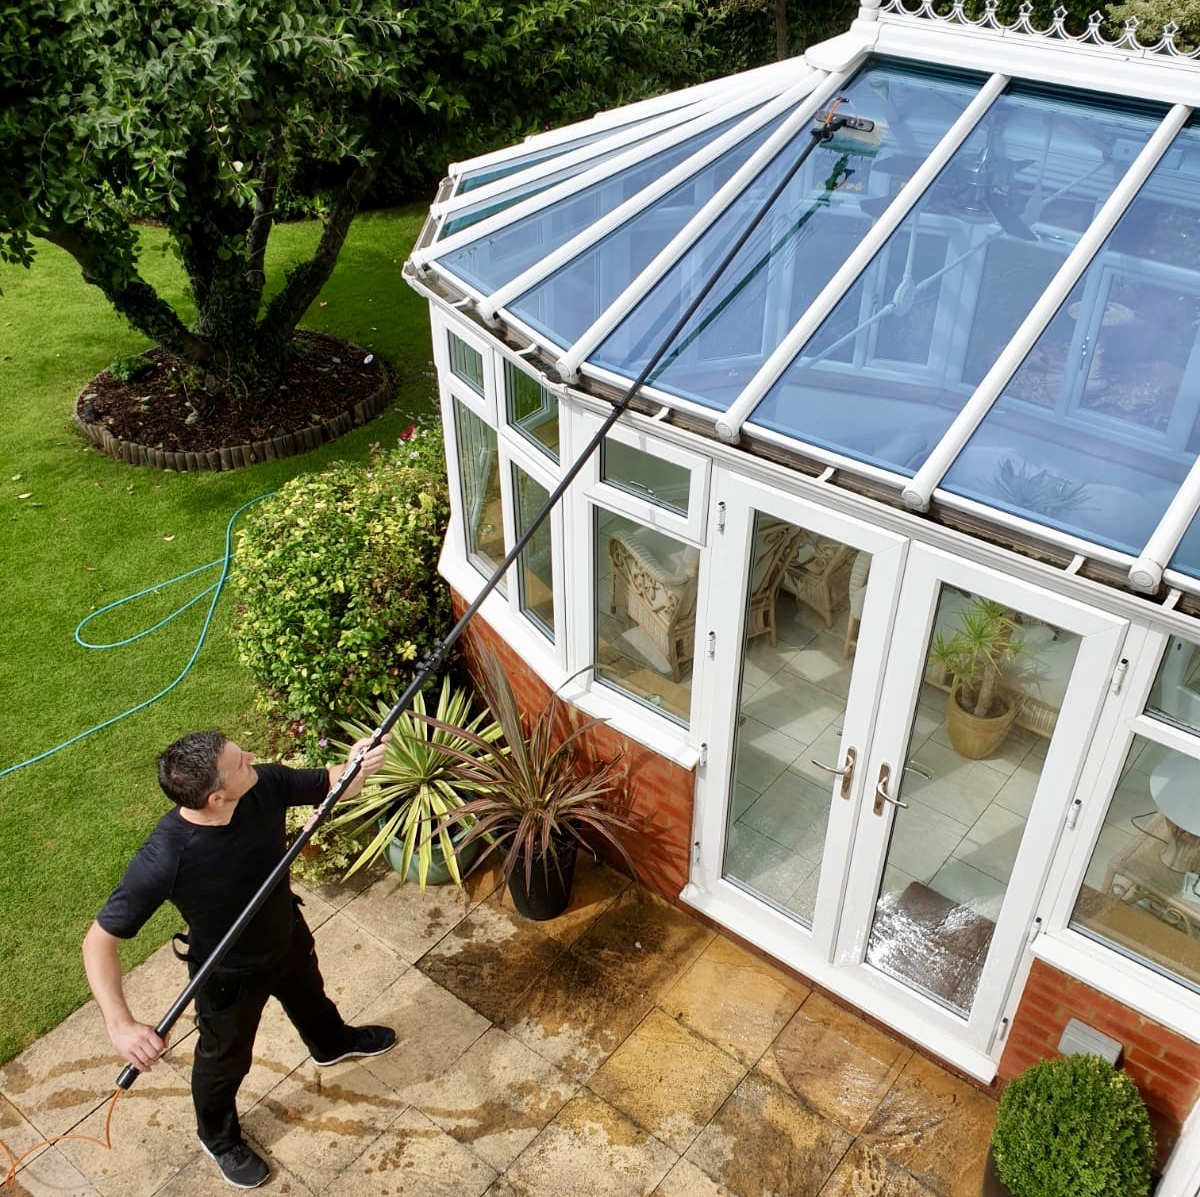 Conservatory Cleaning